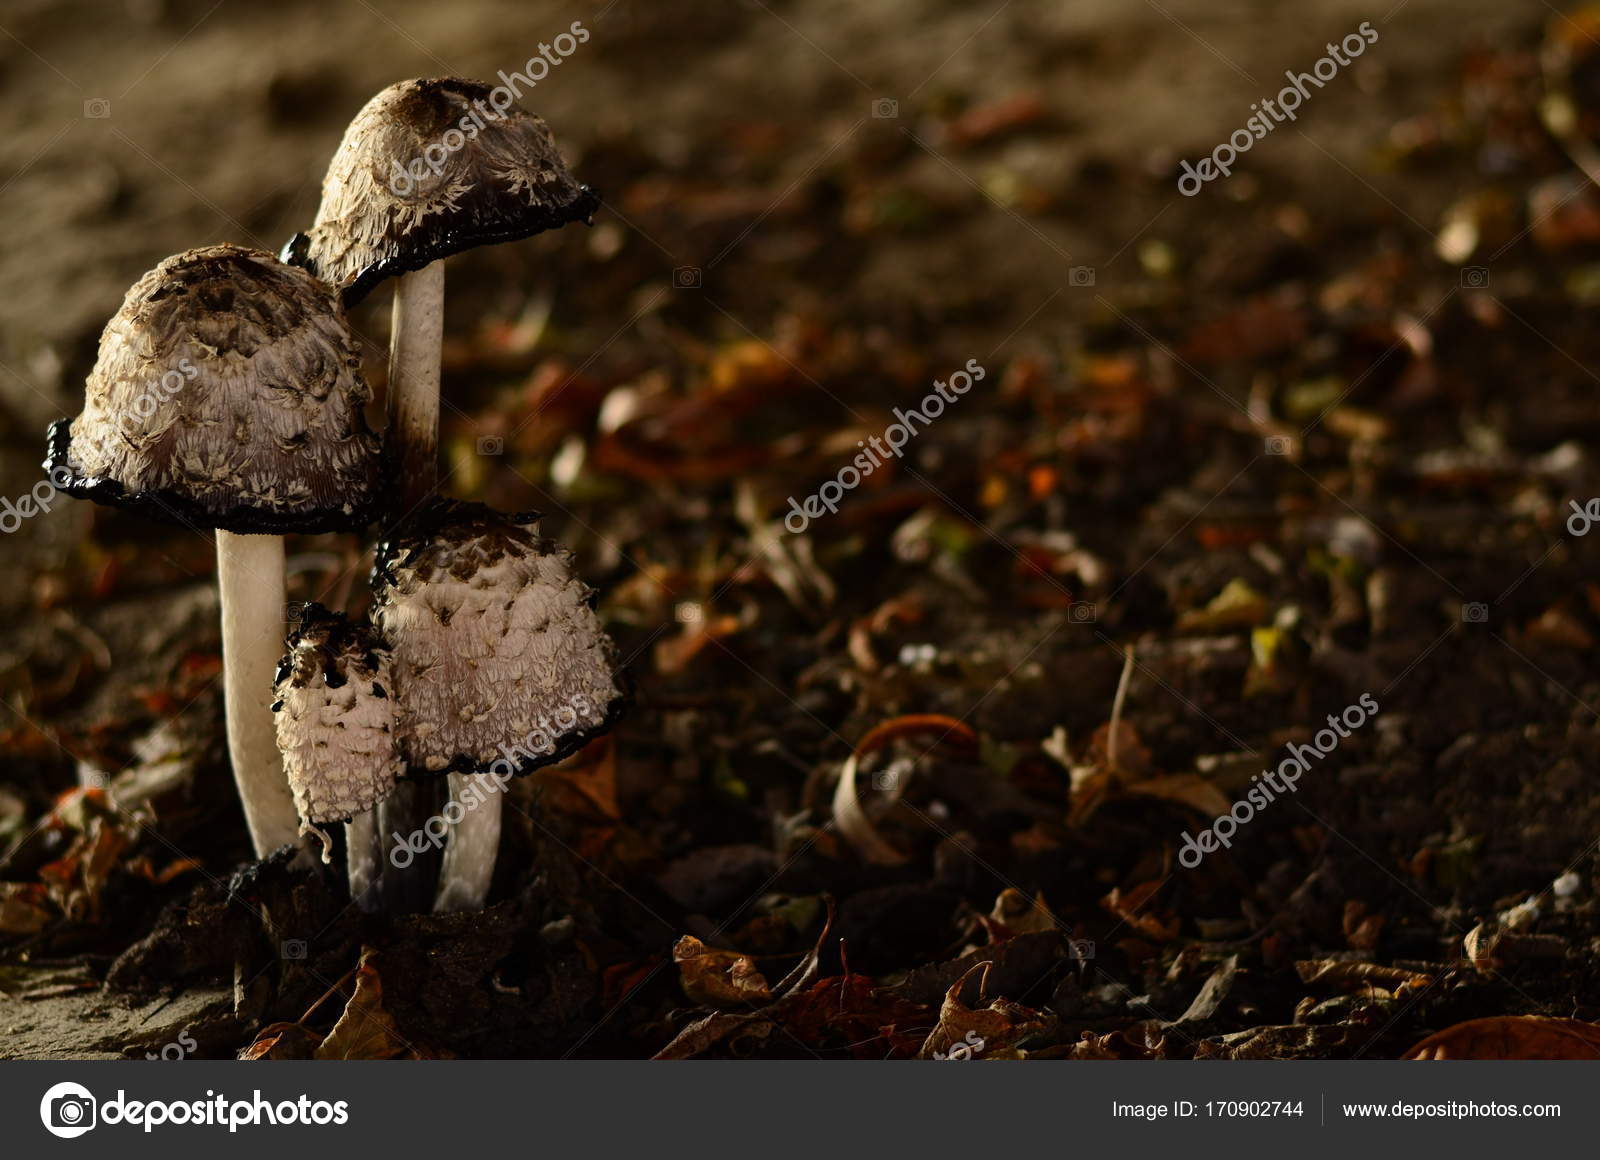 Poisonous Mushrooms Growing Under The Trees In The Garden Stock